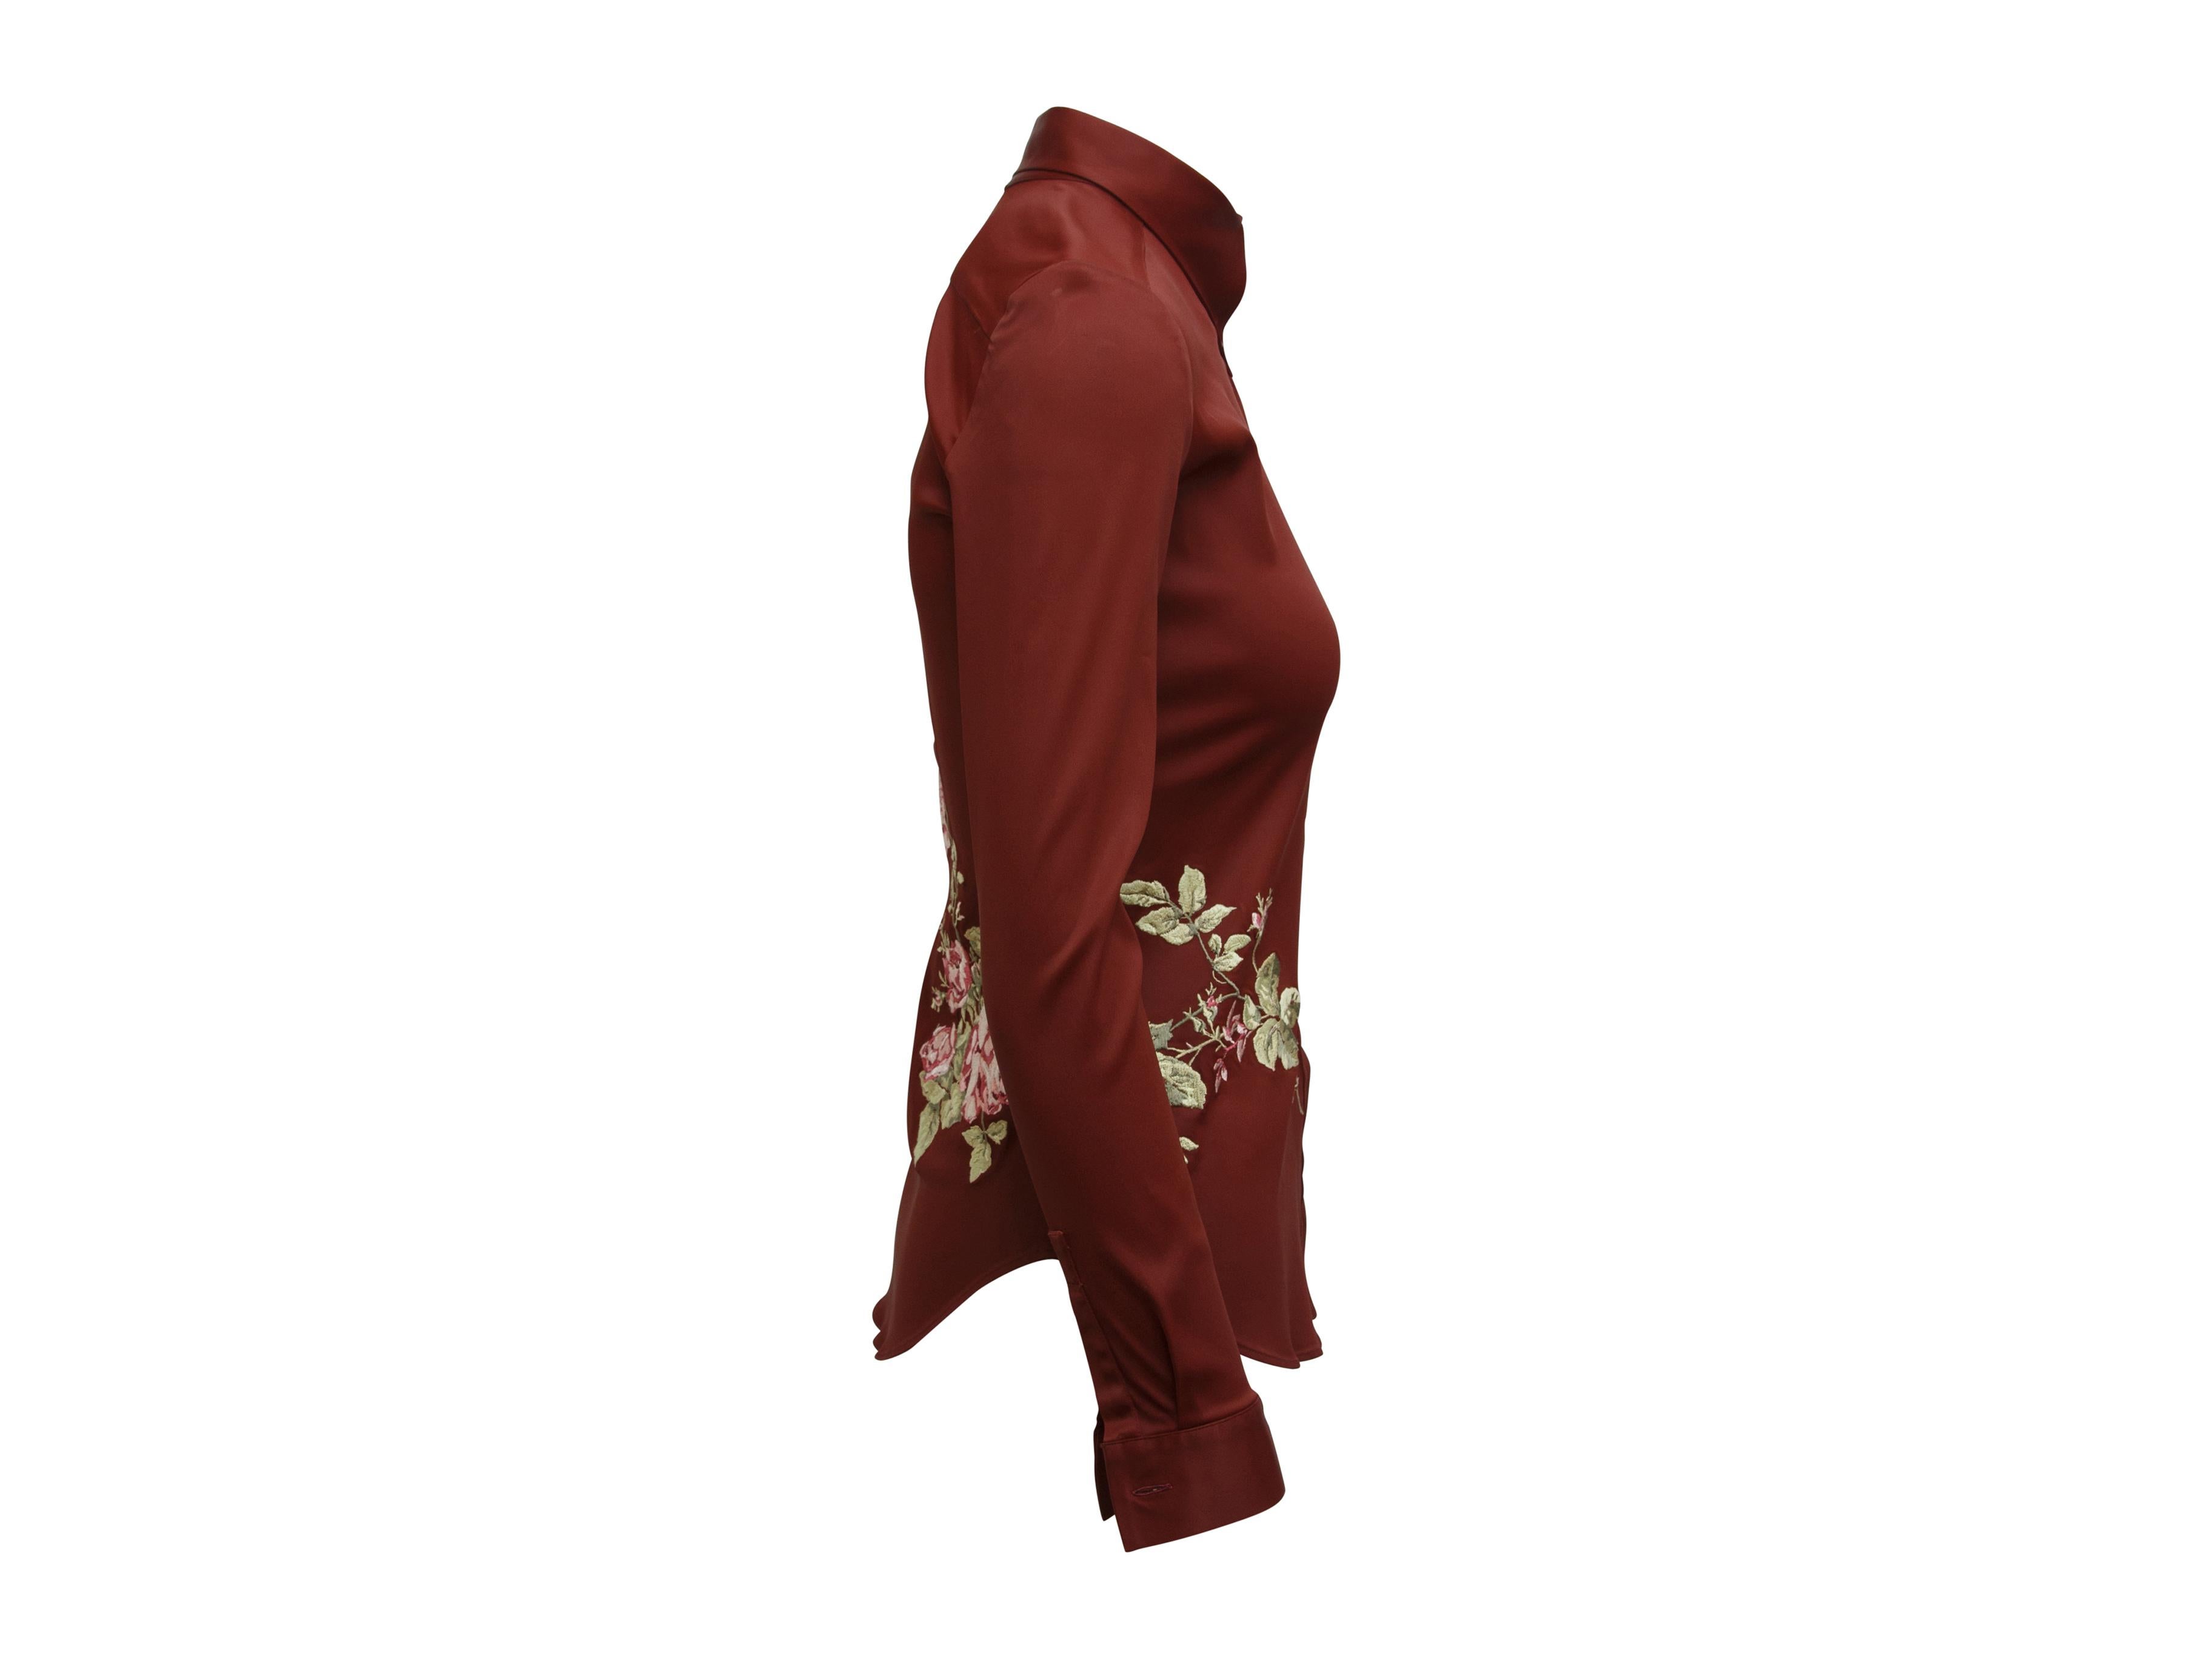 Product details:  Burgundy floral embroidered blouse by Alexander McQueen.  From the Fall 1997 collection.  Asymmetrical point collar.  Long sleeves.  Single button cuffs.  Button-front closure.  Shirttail hem.  32